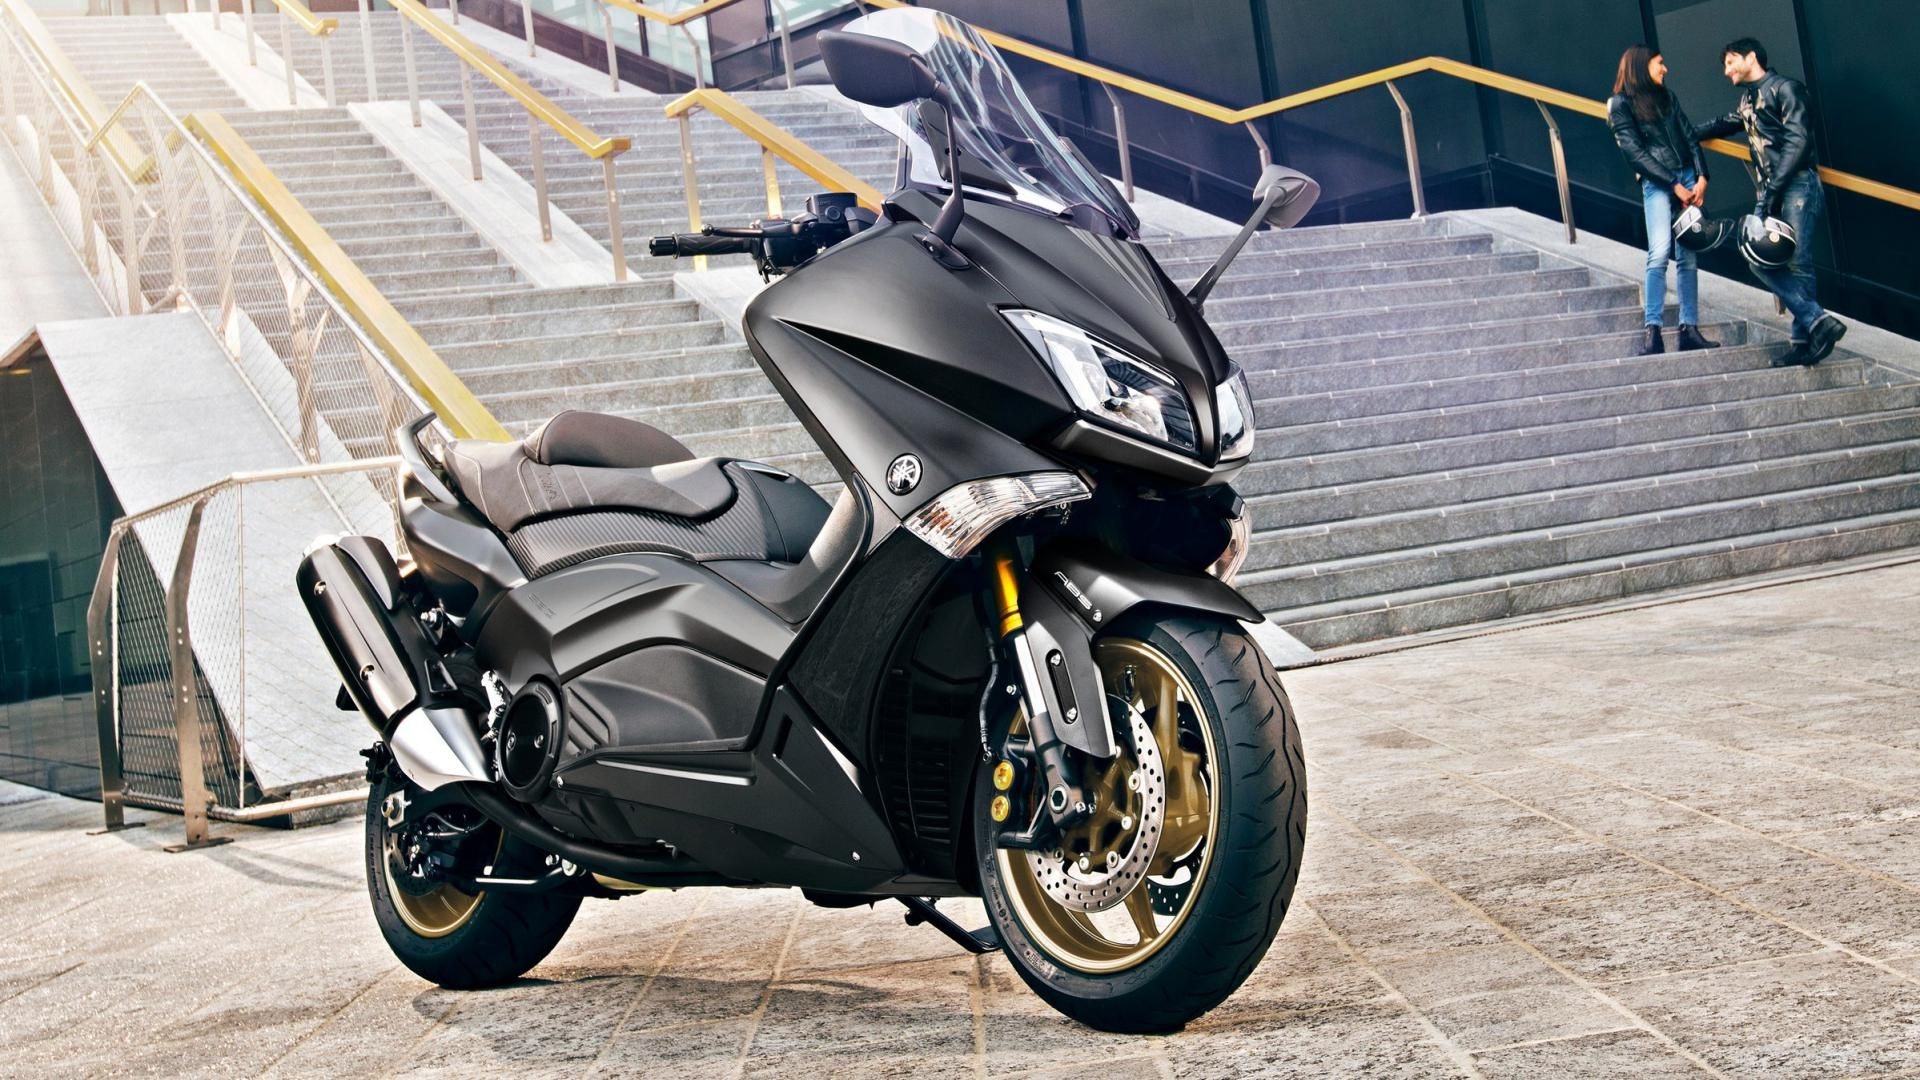 Yamaha TMAX, Auto style, Maxi scooter excellence, Unleash your ride, 1920x1080 Full HD Desktop